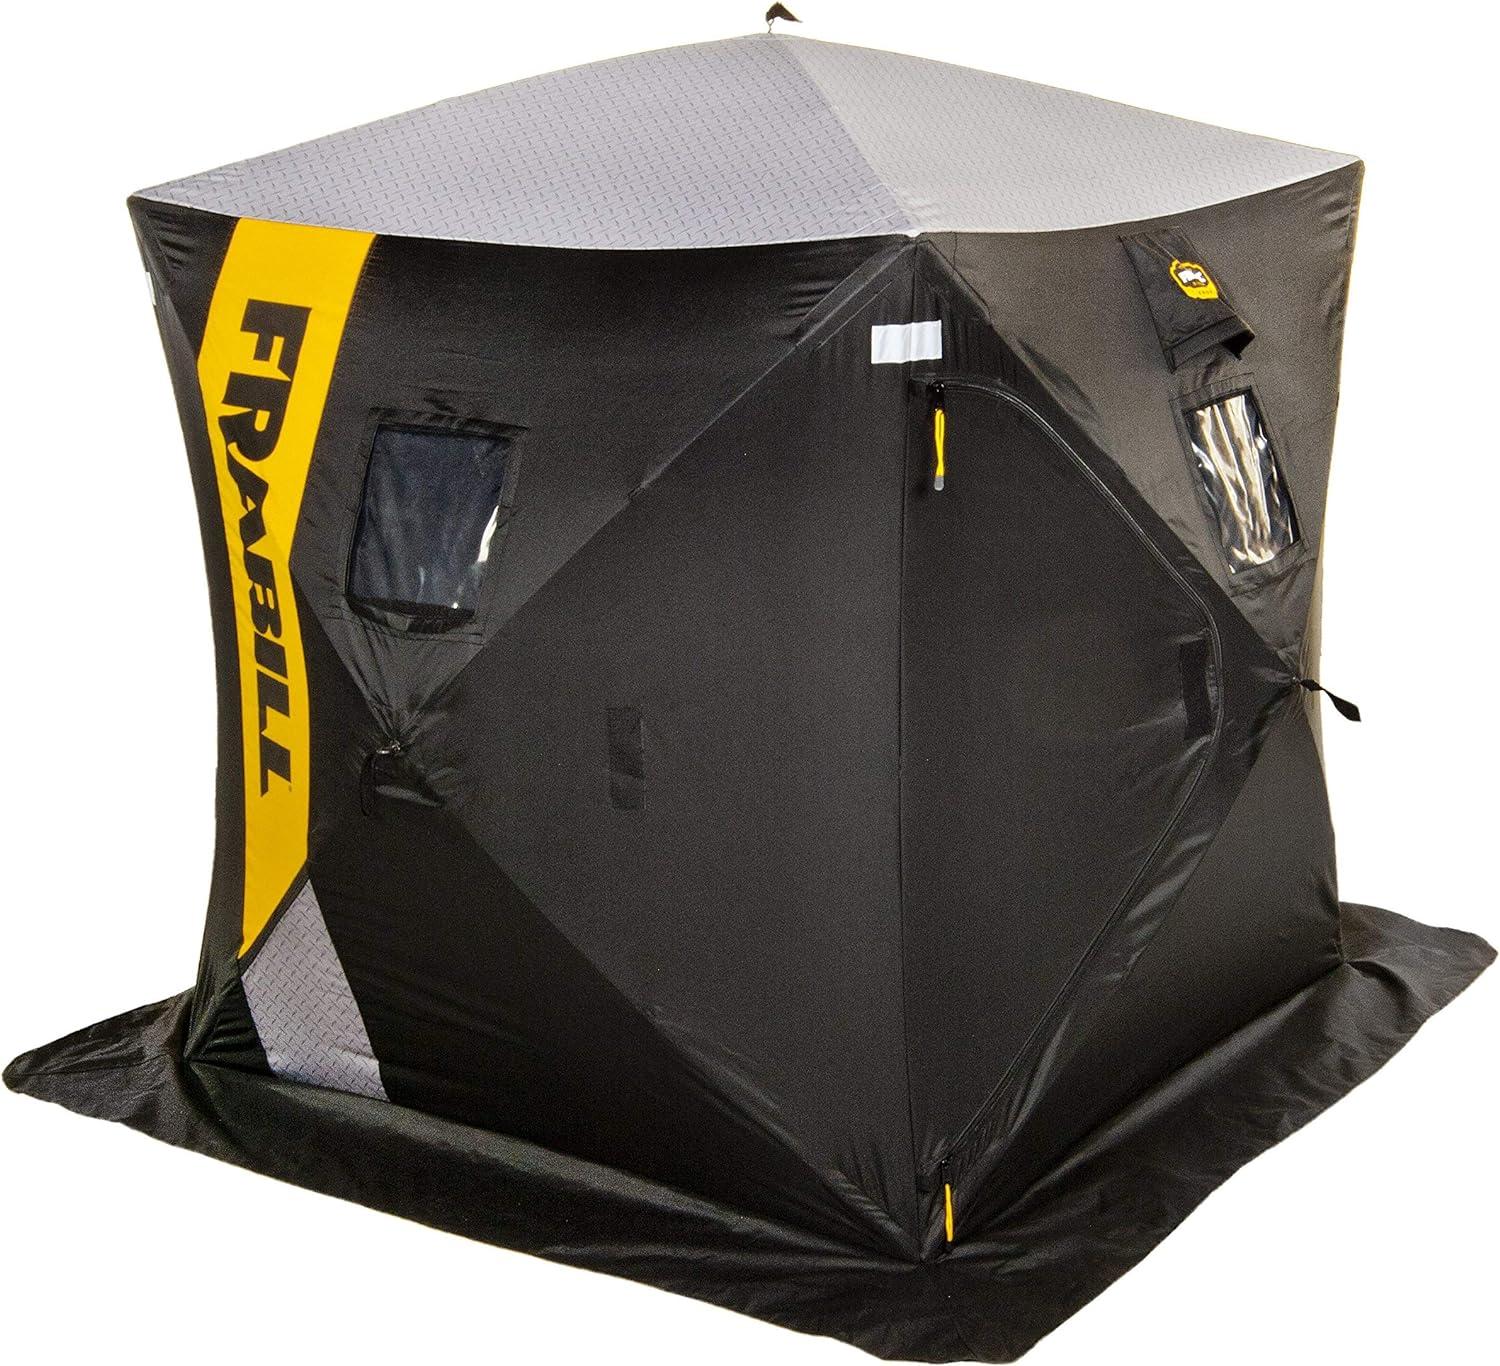 Frabill HQ 100 Ice Fishing Shelter for $62.97 Shipped